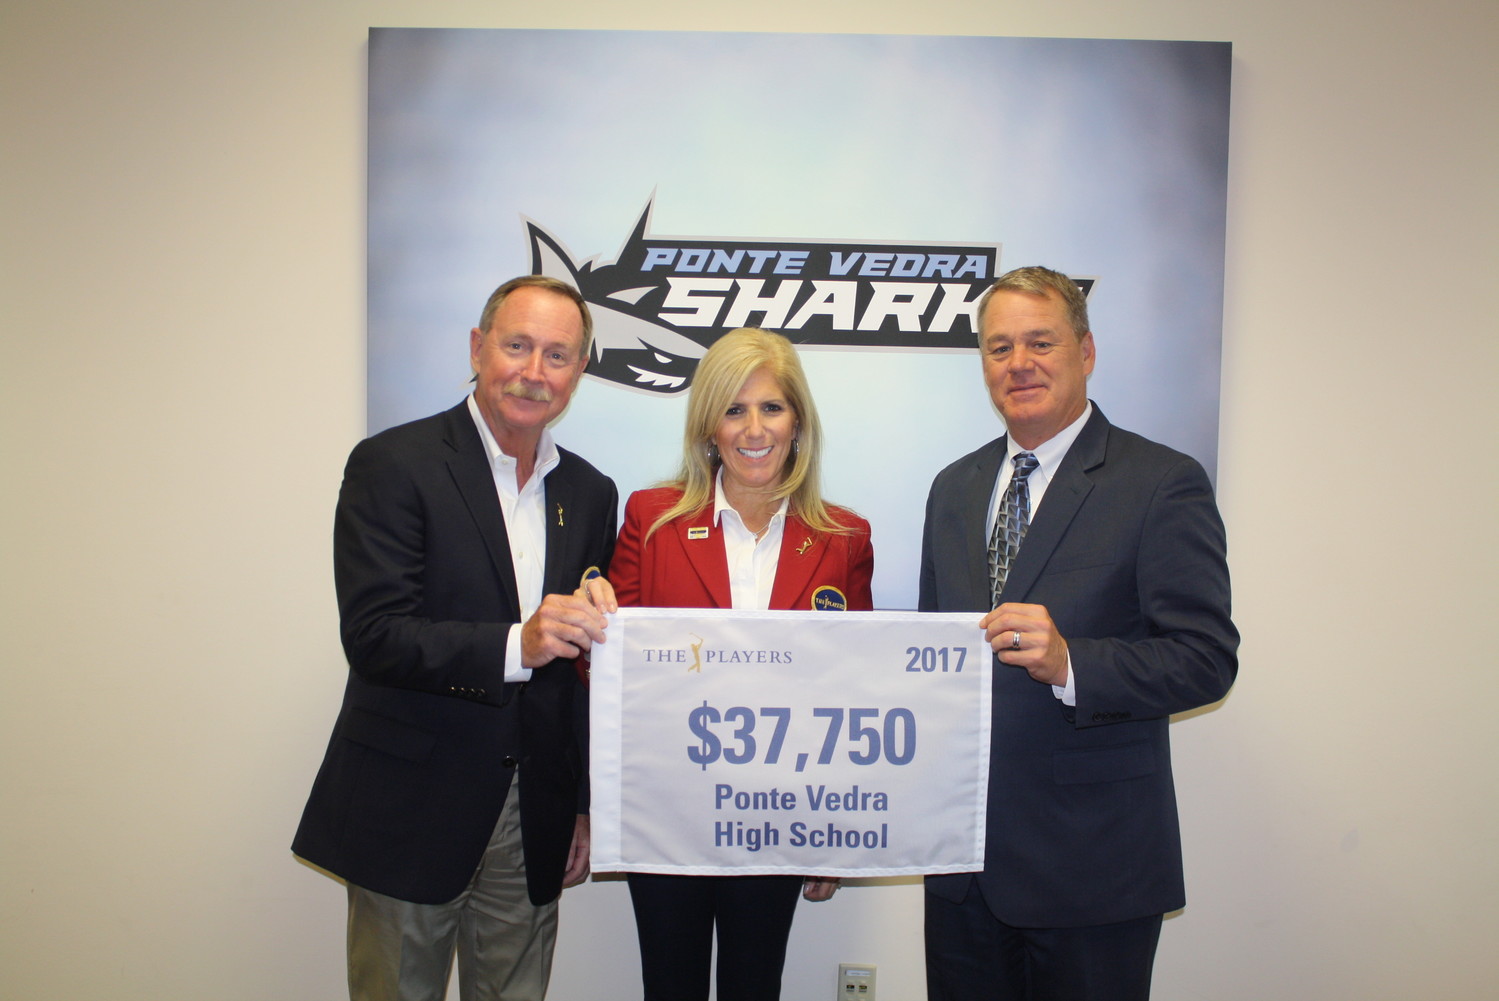 Vice-chair of Players Services Scot Winter (left) and 2016 Tournament Chairman Michele McManamon present Ponte Vedra High School Principal Fred Oberkehr with $37,750 as part of THE PLAYERS’ annual Giving Back events.